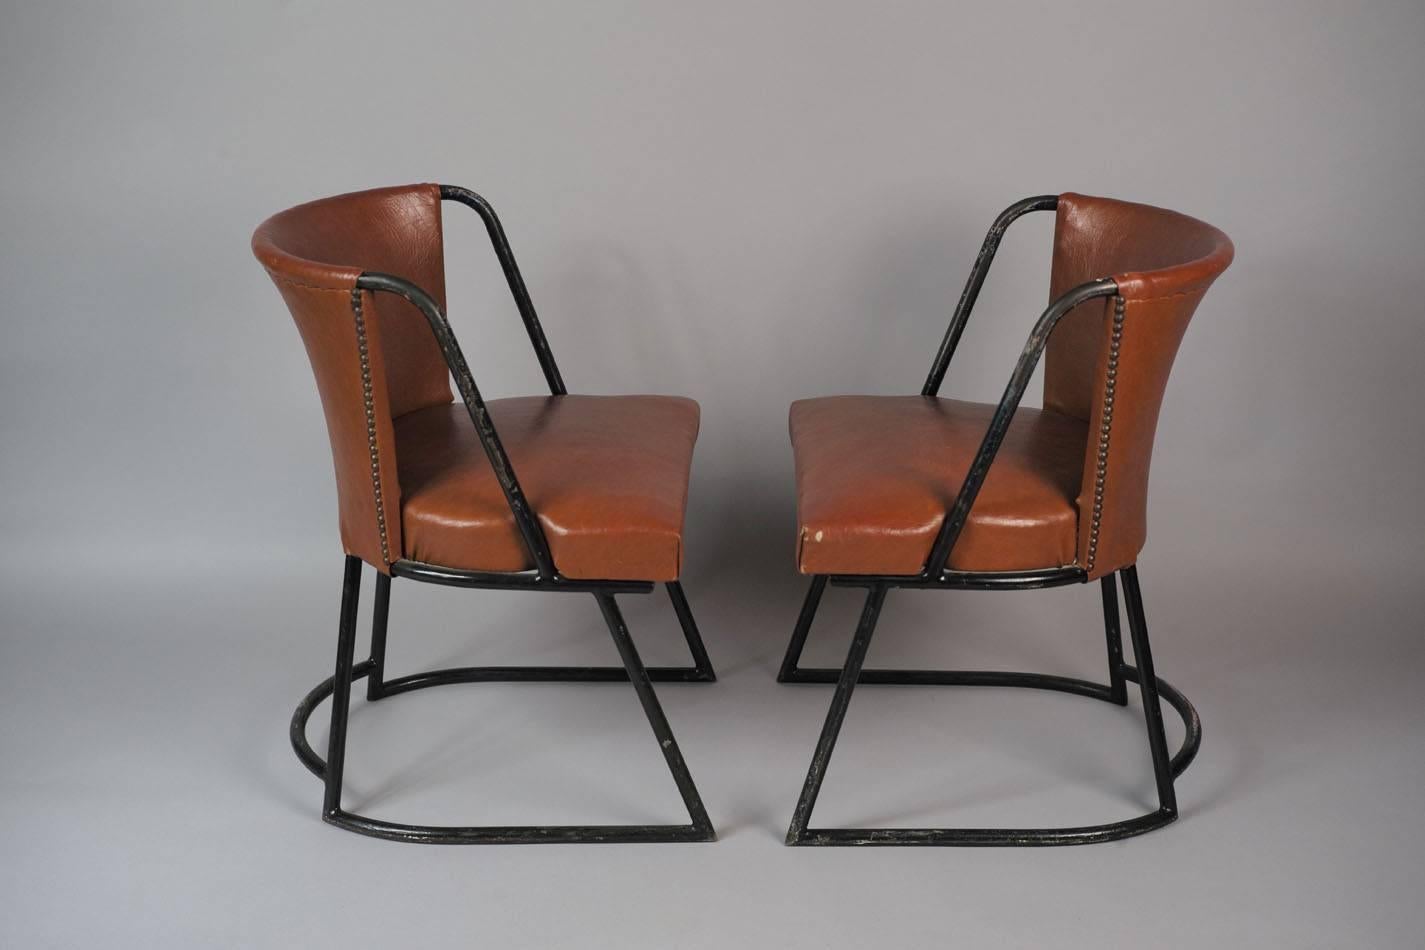 This side chair was designed by Louis Sognot and Charlotte Alix for Primavera in the 1930s. The chair is made from black lacquered tubular metal with studded imitation leather in a cognac shade. It is in a very good vintage condition with some usage